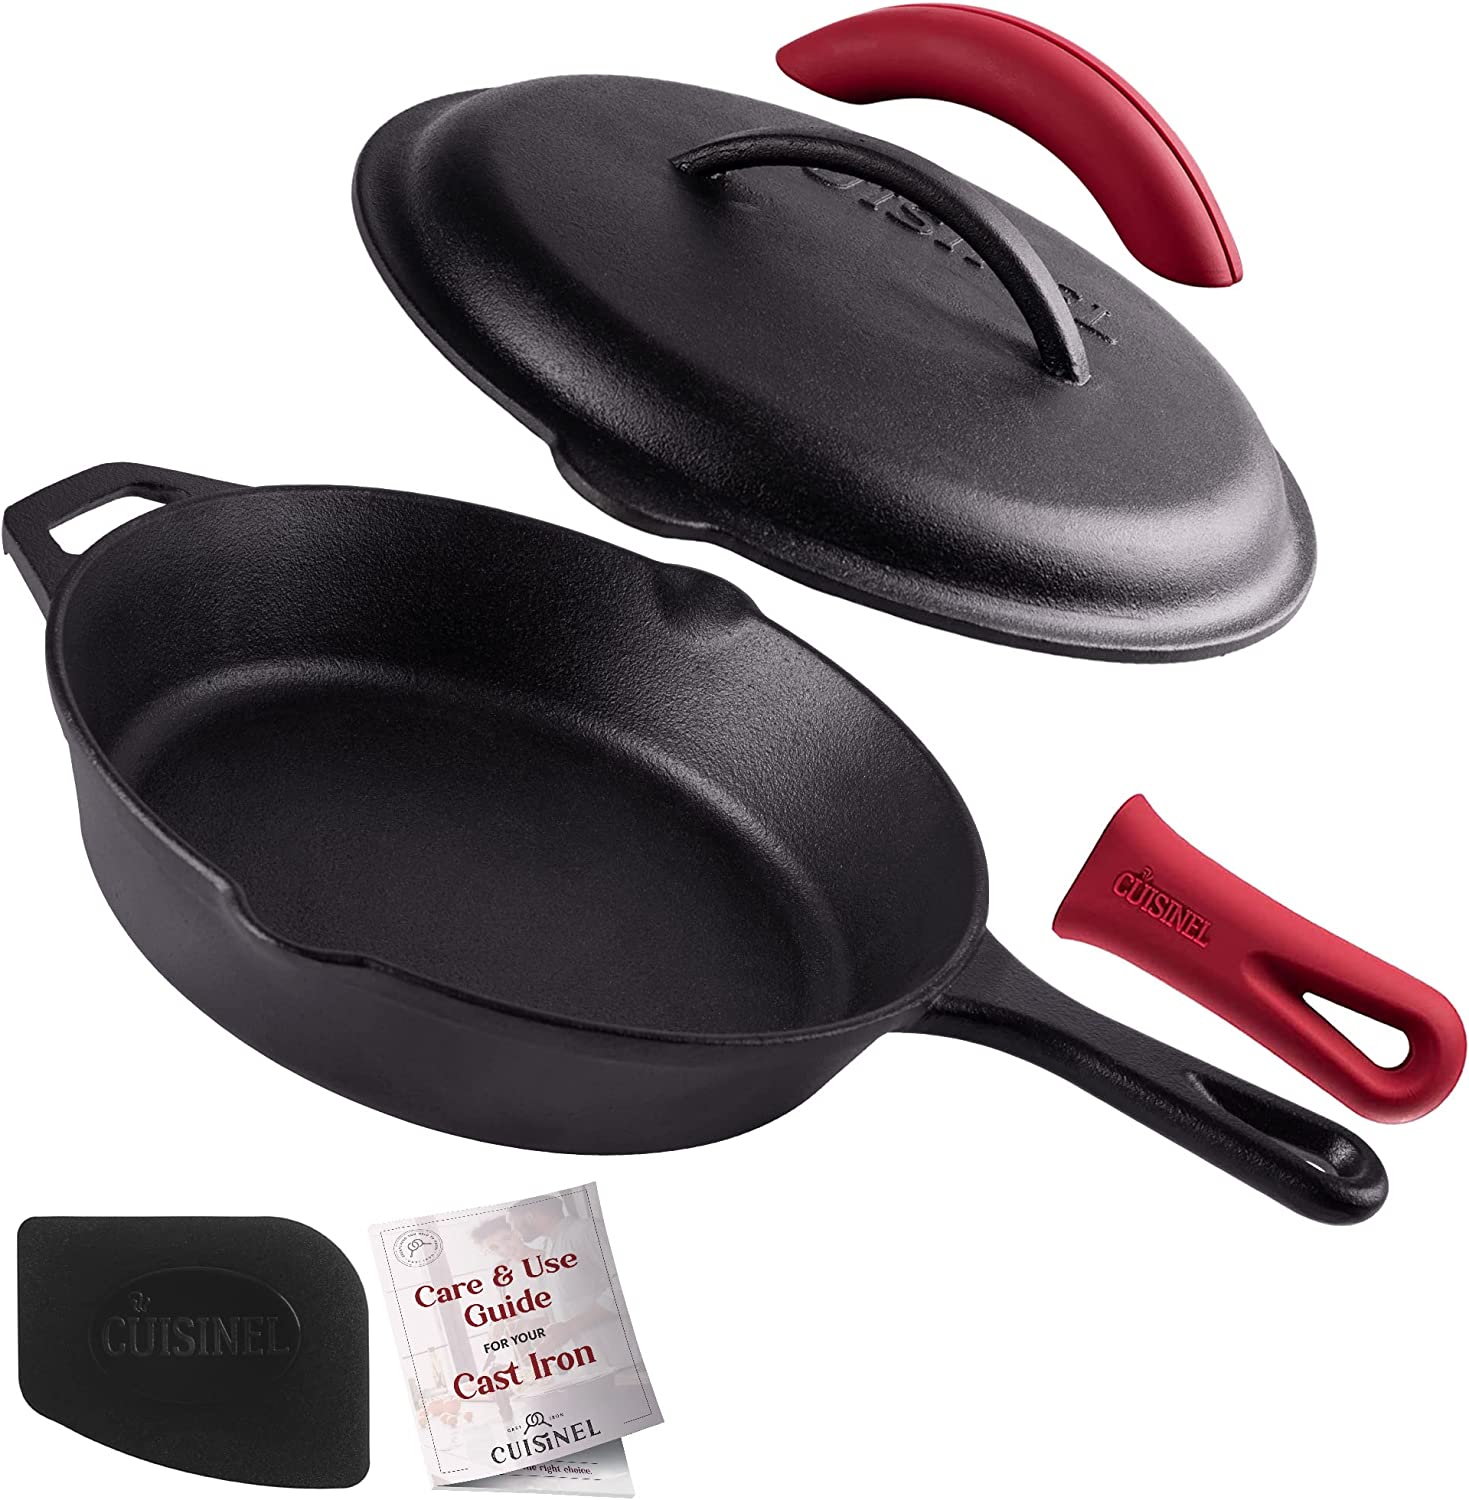 Induction Safe Indoor and Outdoor Use Heat-Resistant Holder Pre-Seasoned Cast Iron Skillet with Glass Lid and Handle Cover Oven Safe Cookware Stovetop Grill 10-Inch 